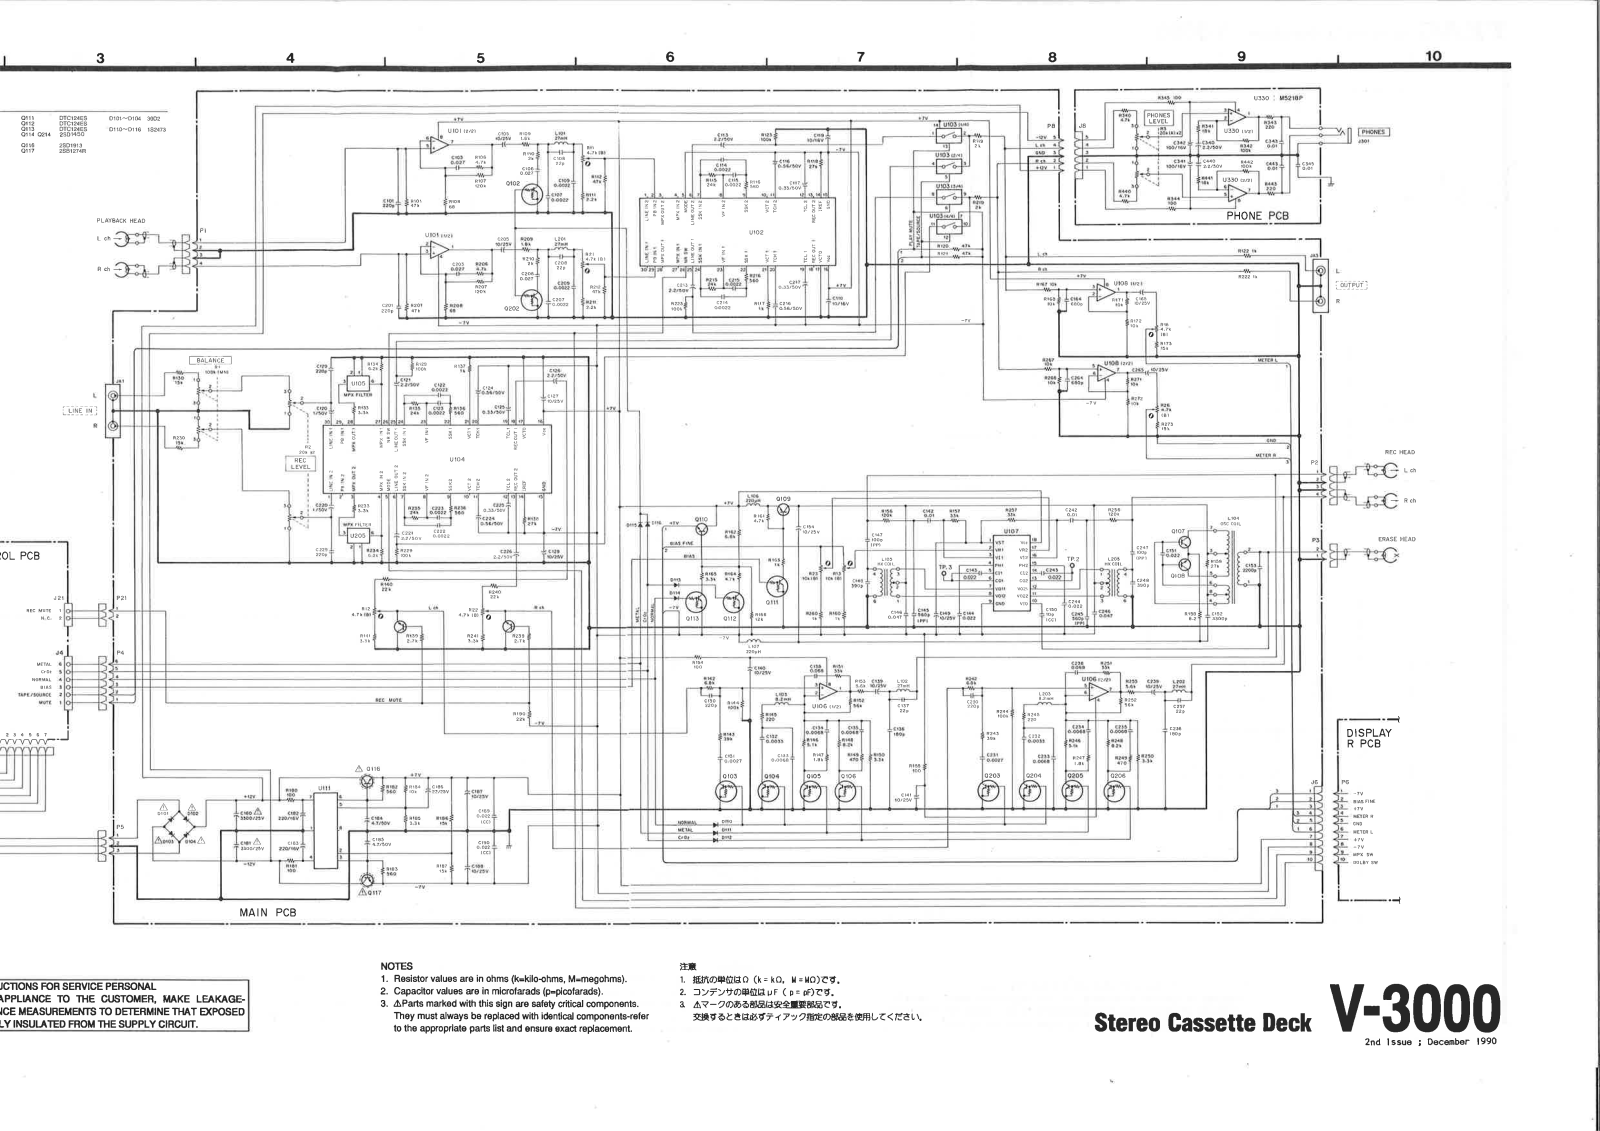 Teac V-3000 Schematic